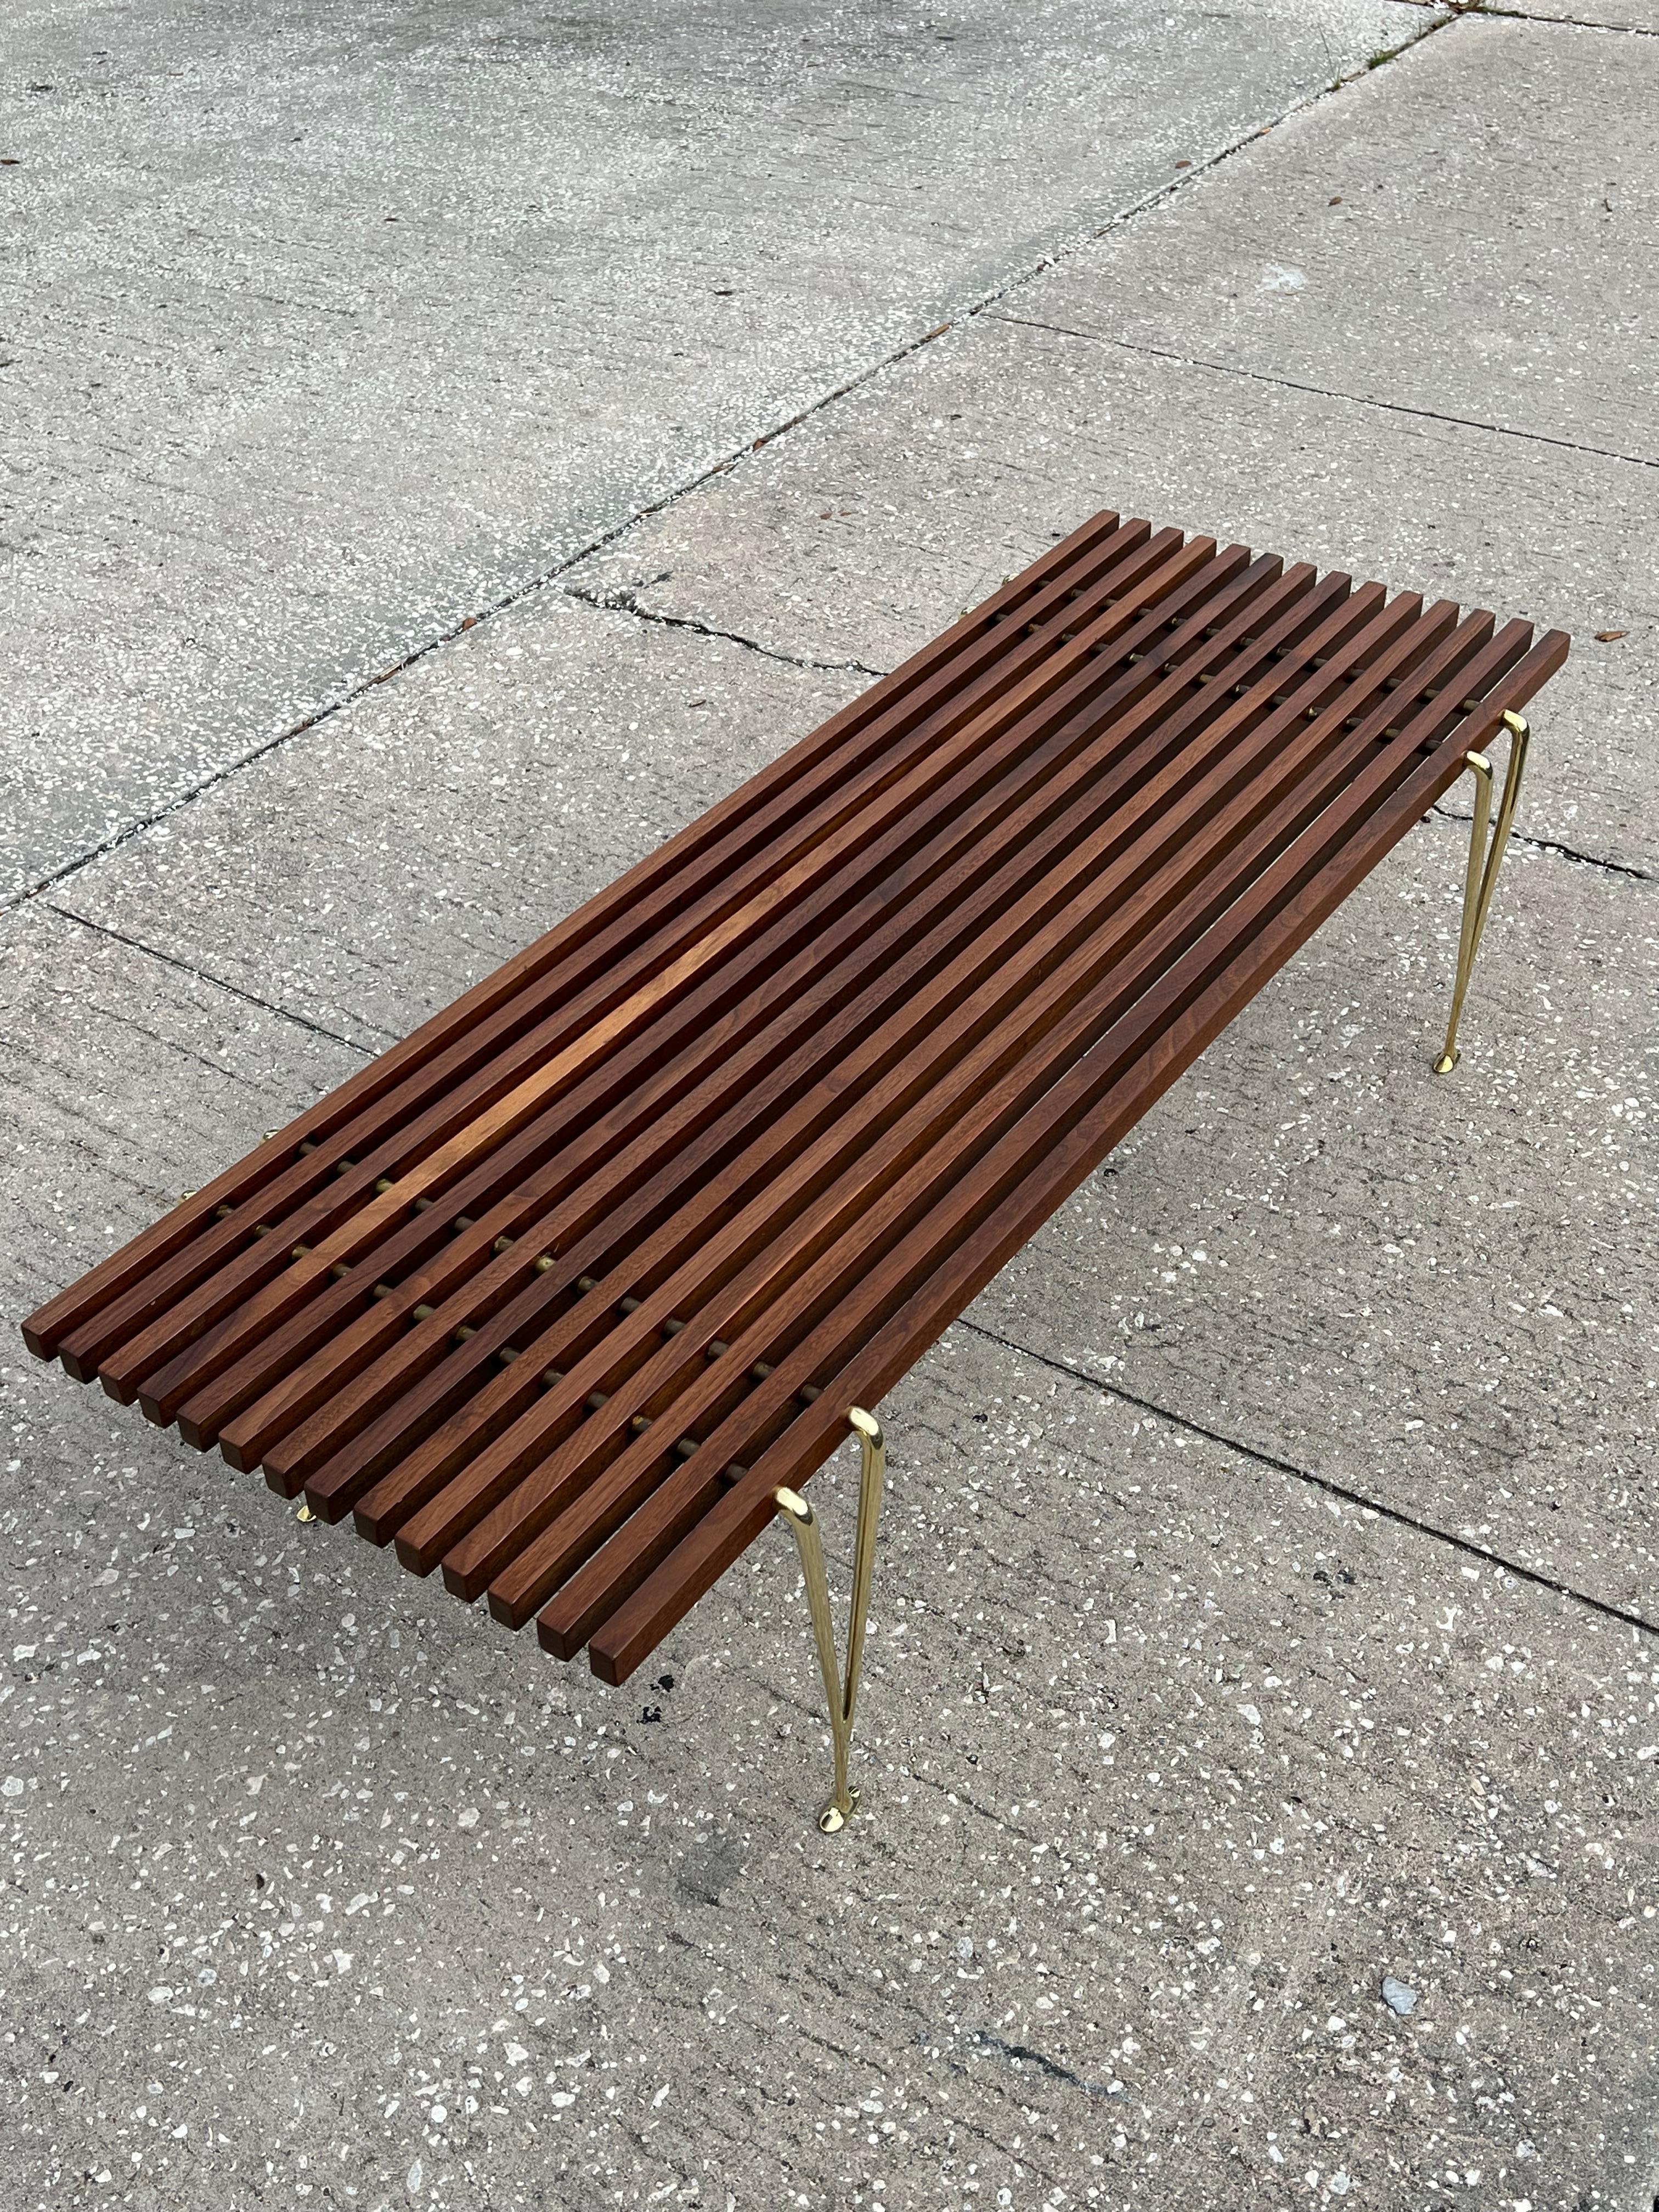 A Classic Hugh Acton Slat Bench With Solid Brass Legs ca' 1950's For Sale 5